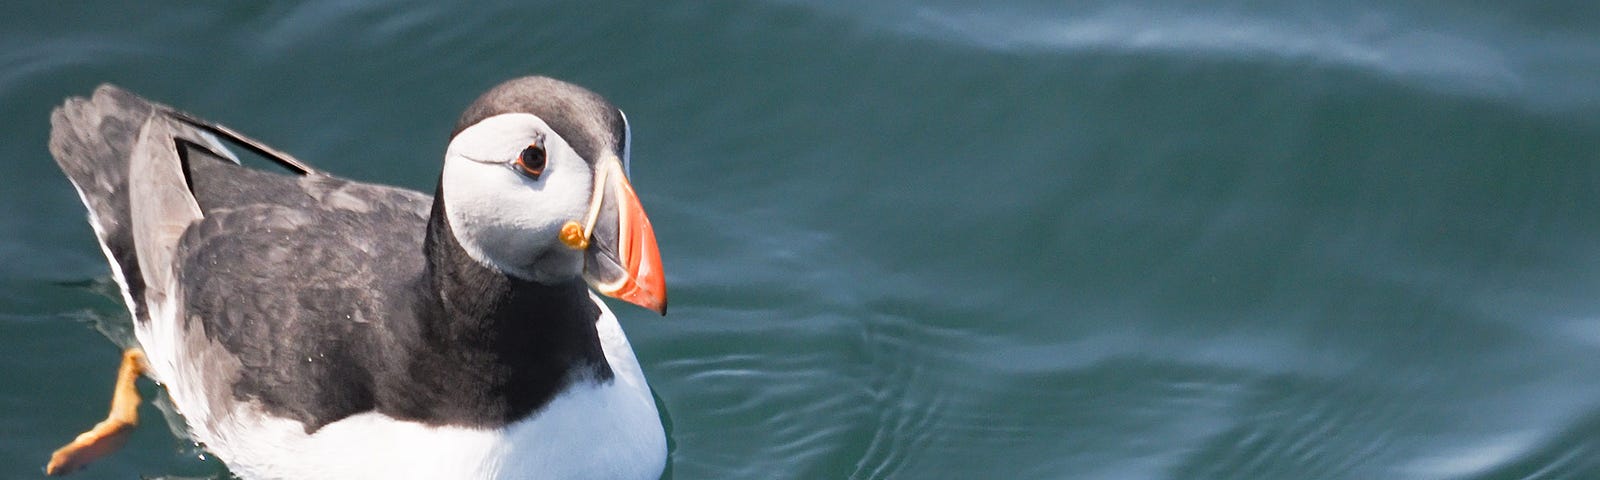 Puffin swimming on the surface of the sea.